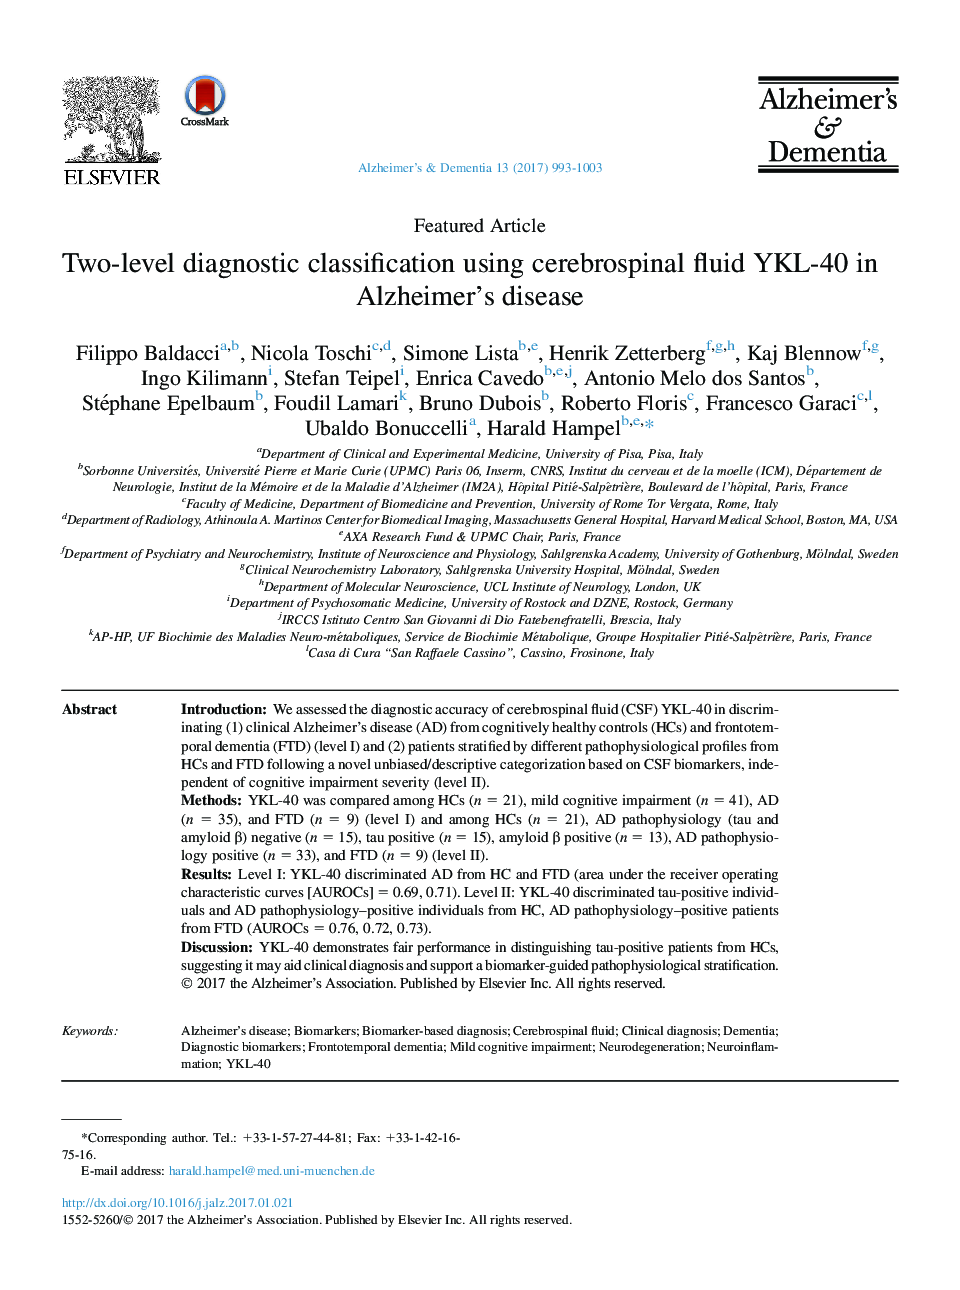 Featured ArticleTwo-level diagnostic classification using cerebrospinal fluid YKL-40 in Alzheimer's disease